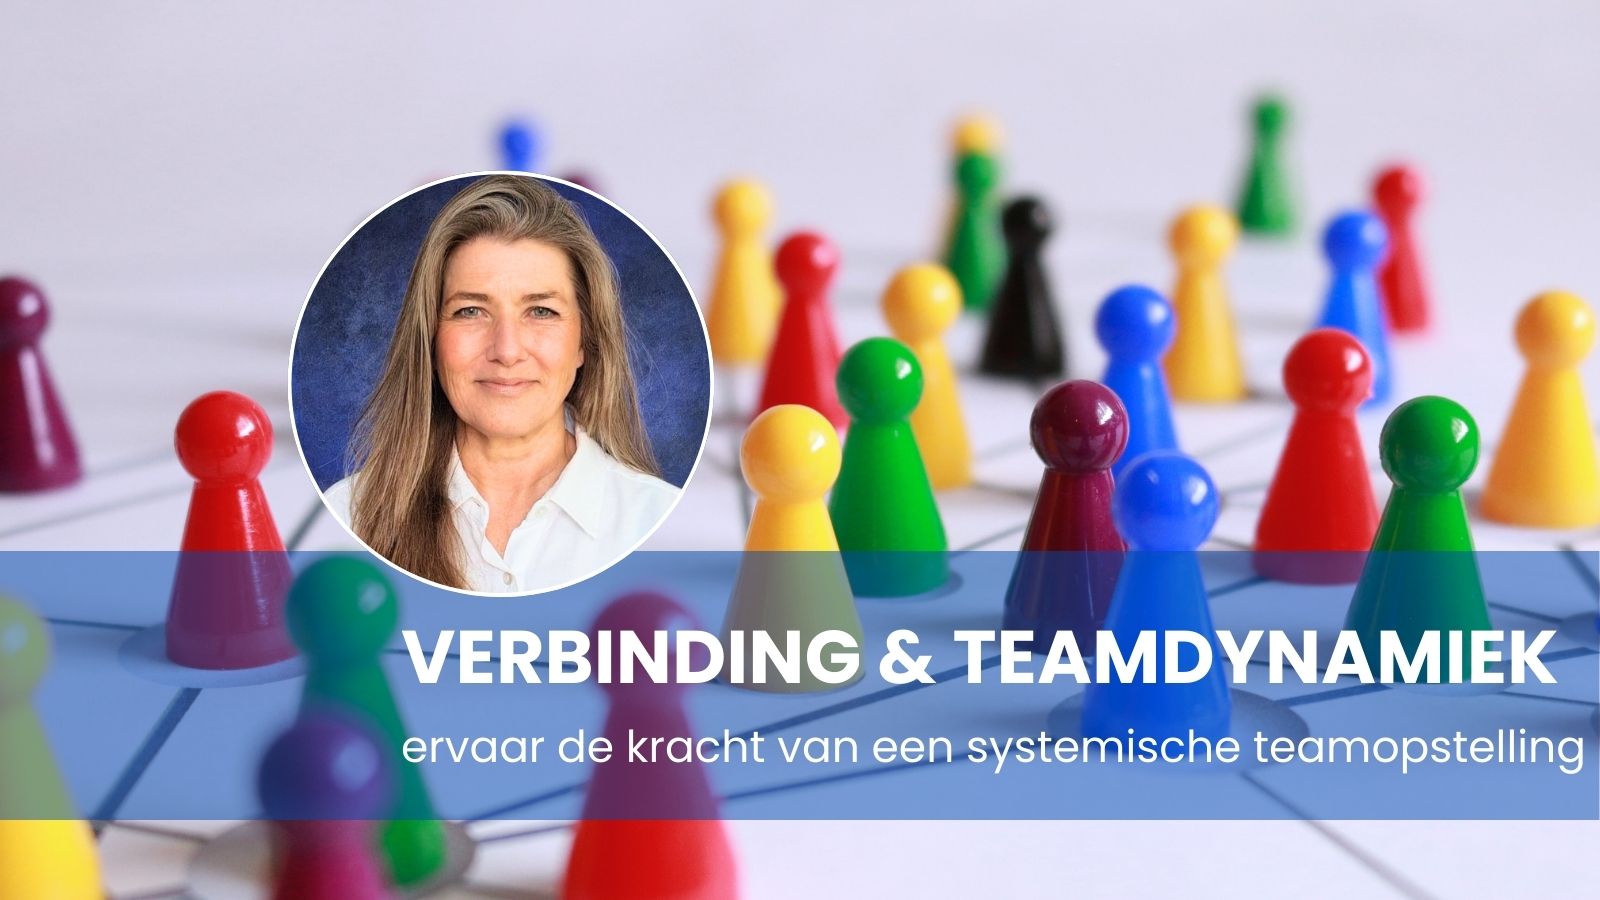 Teambuilding: Systemische teamopstelling